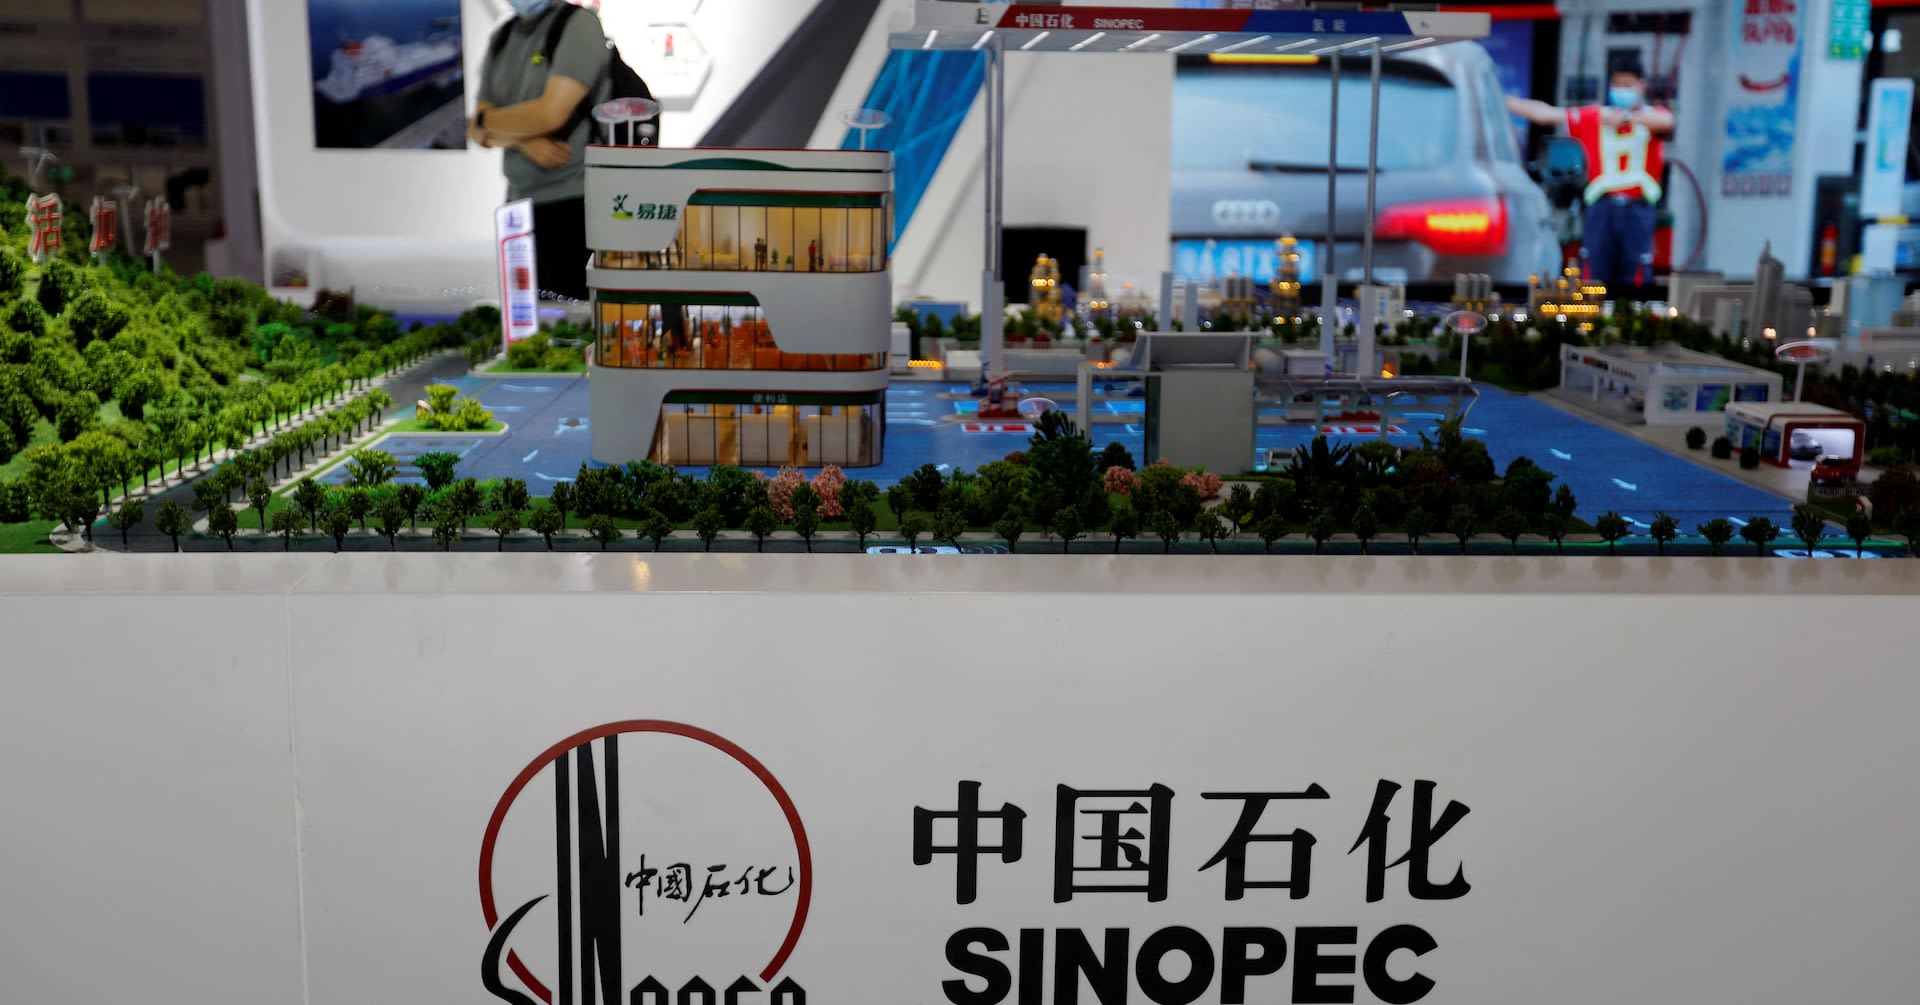 Exclusive: China's Sinopec in talks for gas offtake, stake in Canada's Cedar LNG